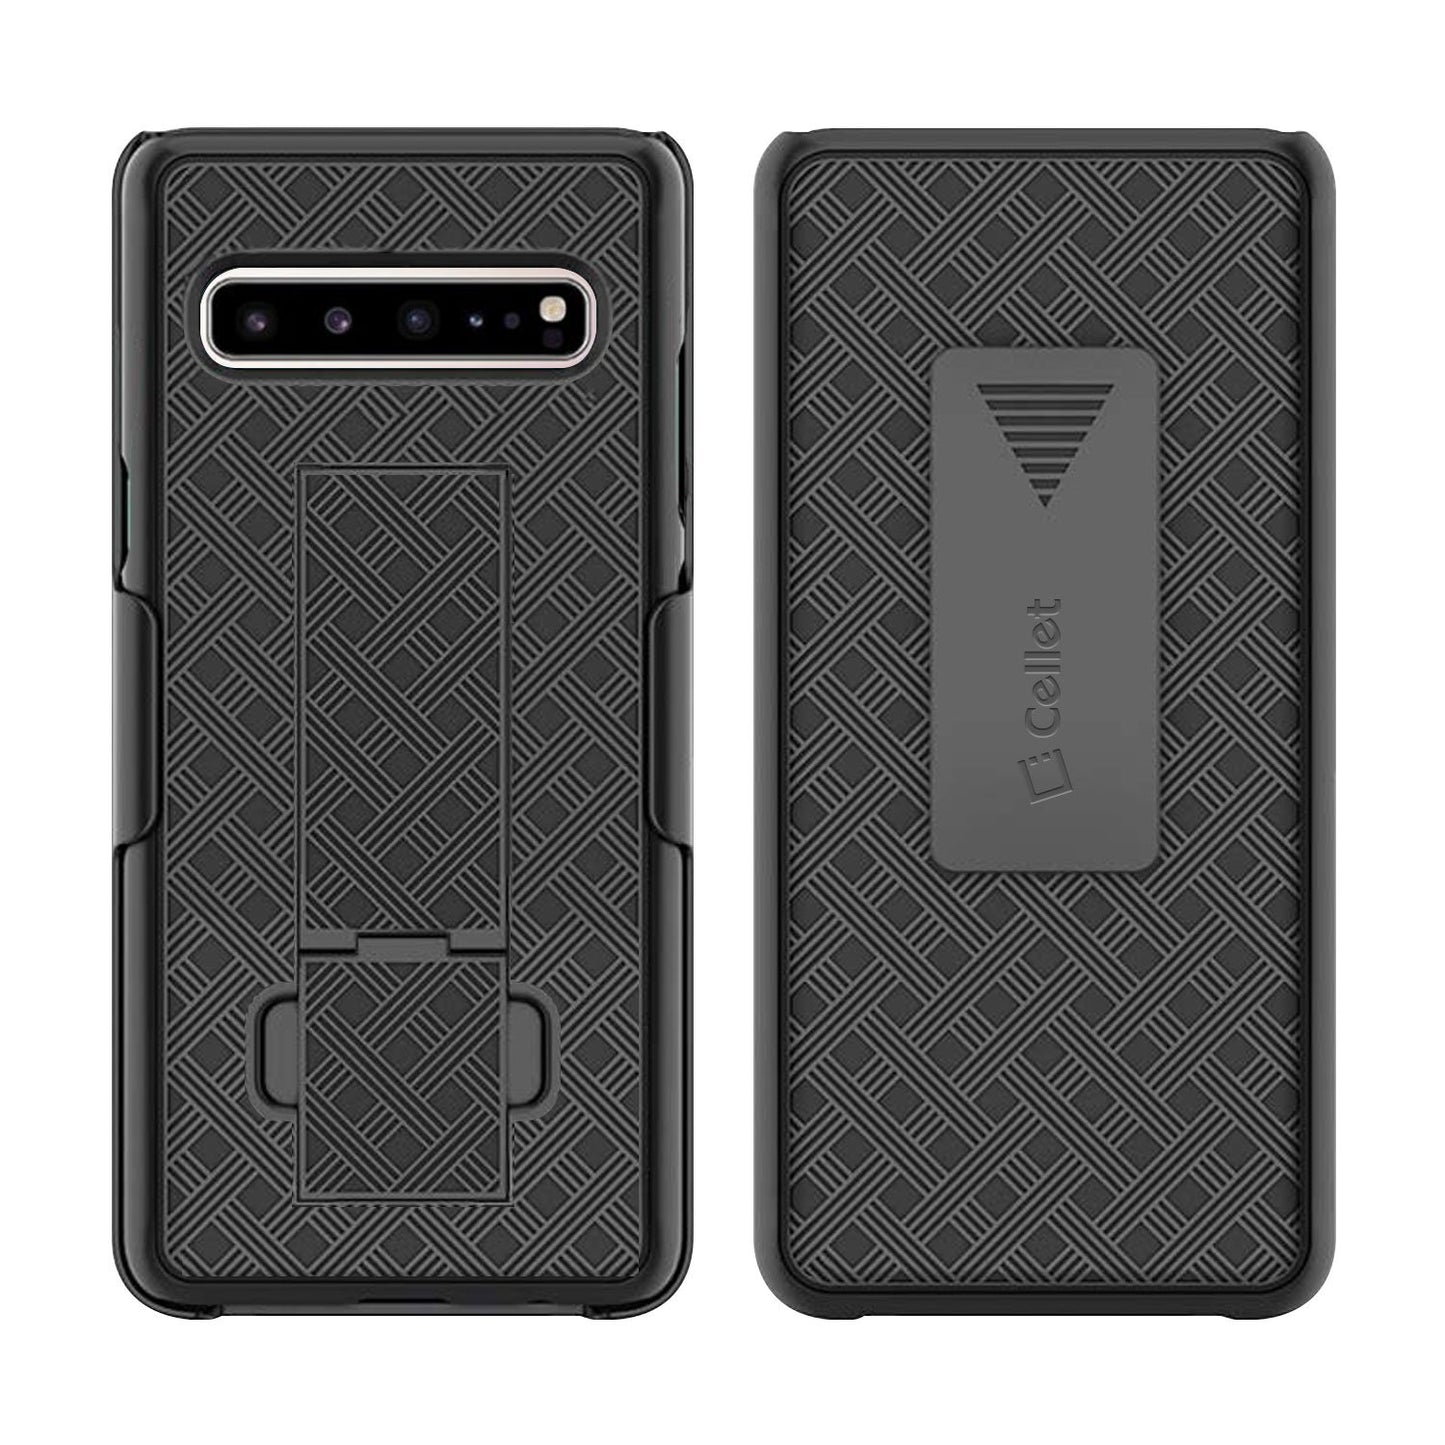 HLSAMS105G - Belt Clip Holster & Shell Case with Kickstand Heavy Duty Protection - Galaxy S10 5G